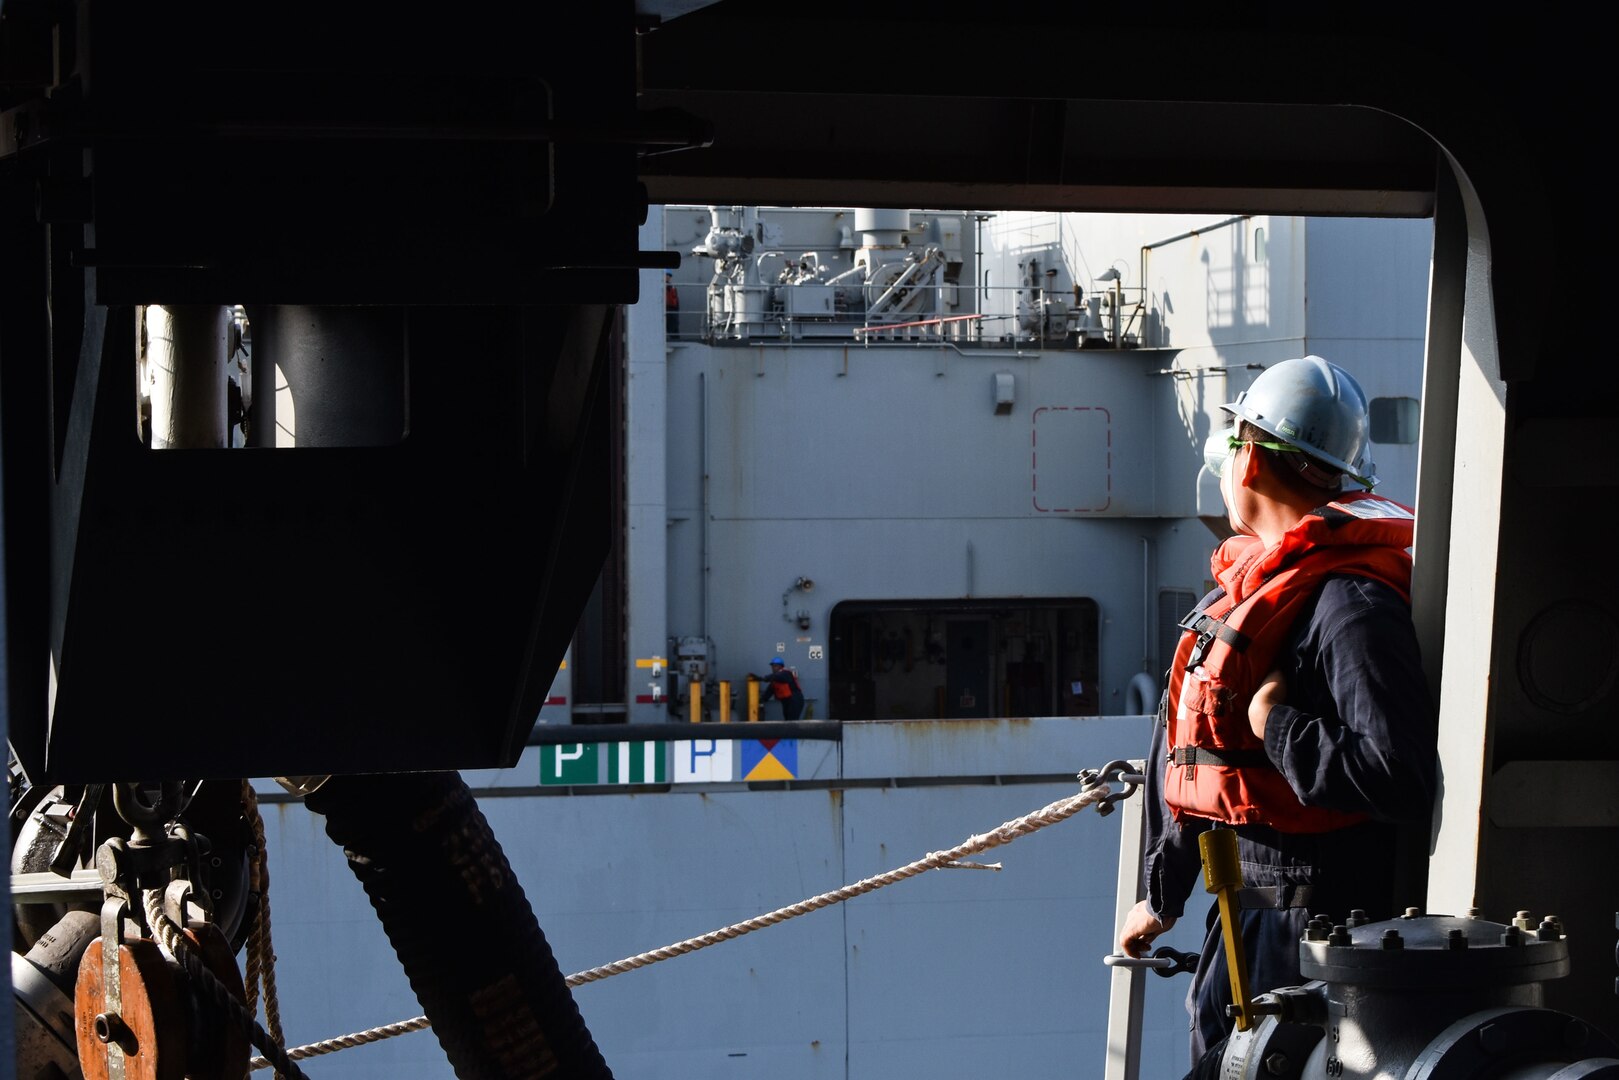 U.S. FIFTH FLEET AREA OF OPERATIONS (Dec. 22, 2017) – A Sailor with USS San Diego observes USNS Washington Chambers during a replenishment at sea. San Diego, with the embarked 15th Marine Expeditionary Unit, is deployed to the U.S. 5th Fleet area of operations in support of maritime security operations to reassure allies and partners and preserve the freedom of navigation and the free flow of commerce in the region.